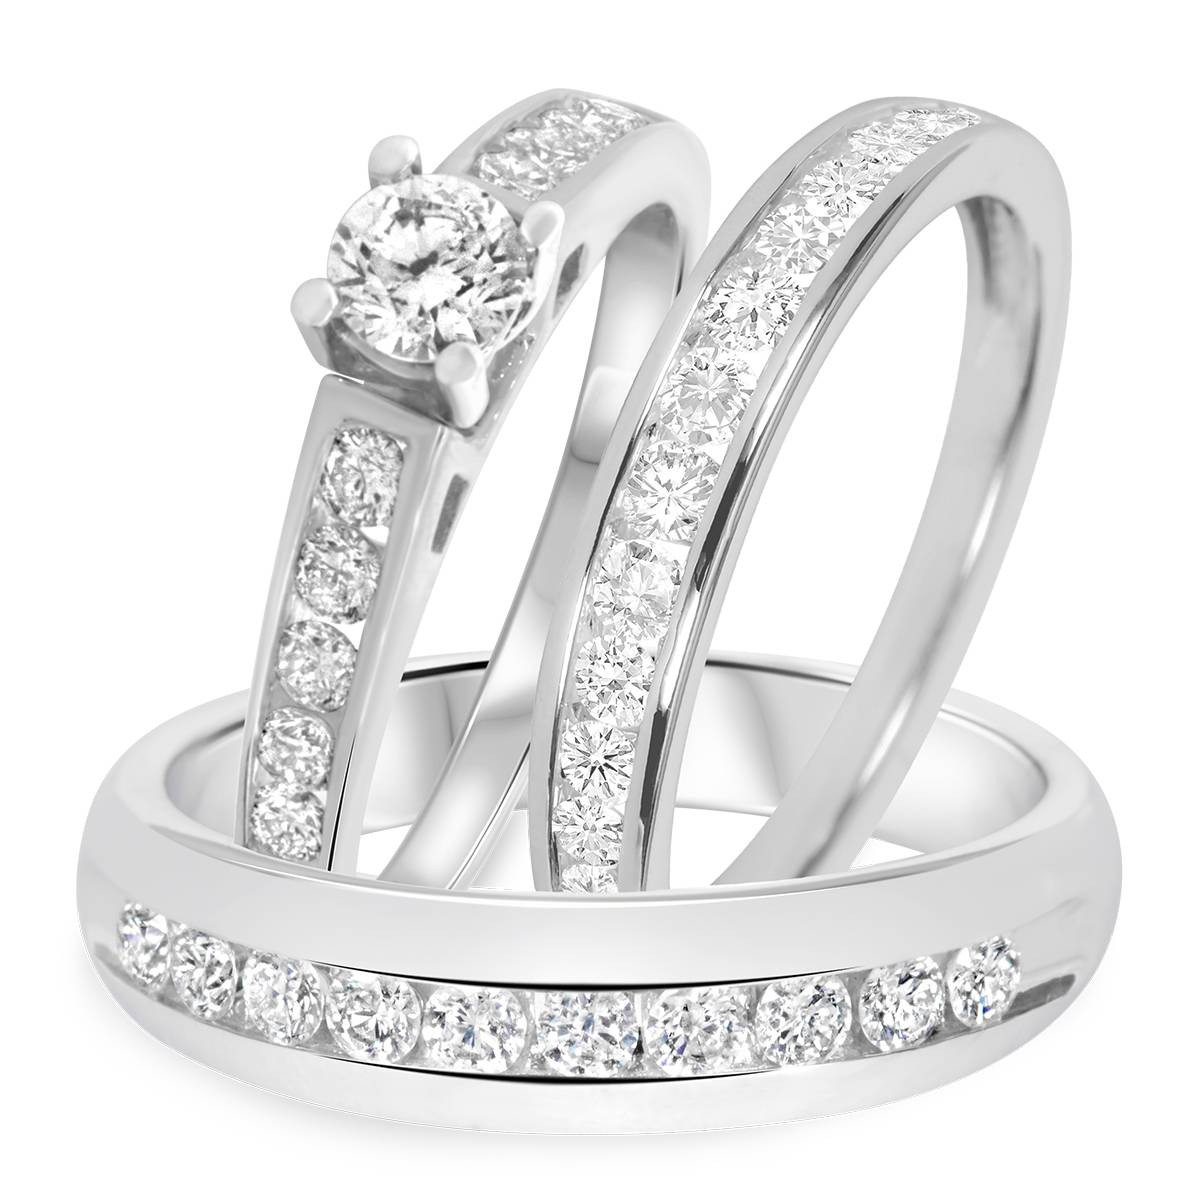 Wedding Ring Sets His And Hers
 15 Inspirations of Cheap Wedding Bands Sets His And Hers